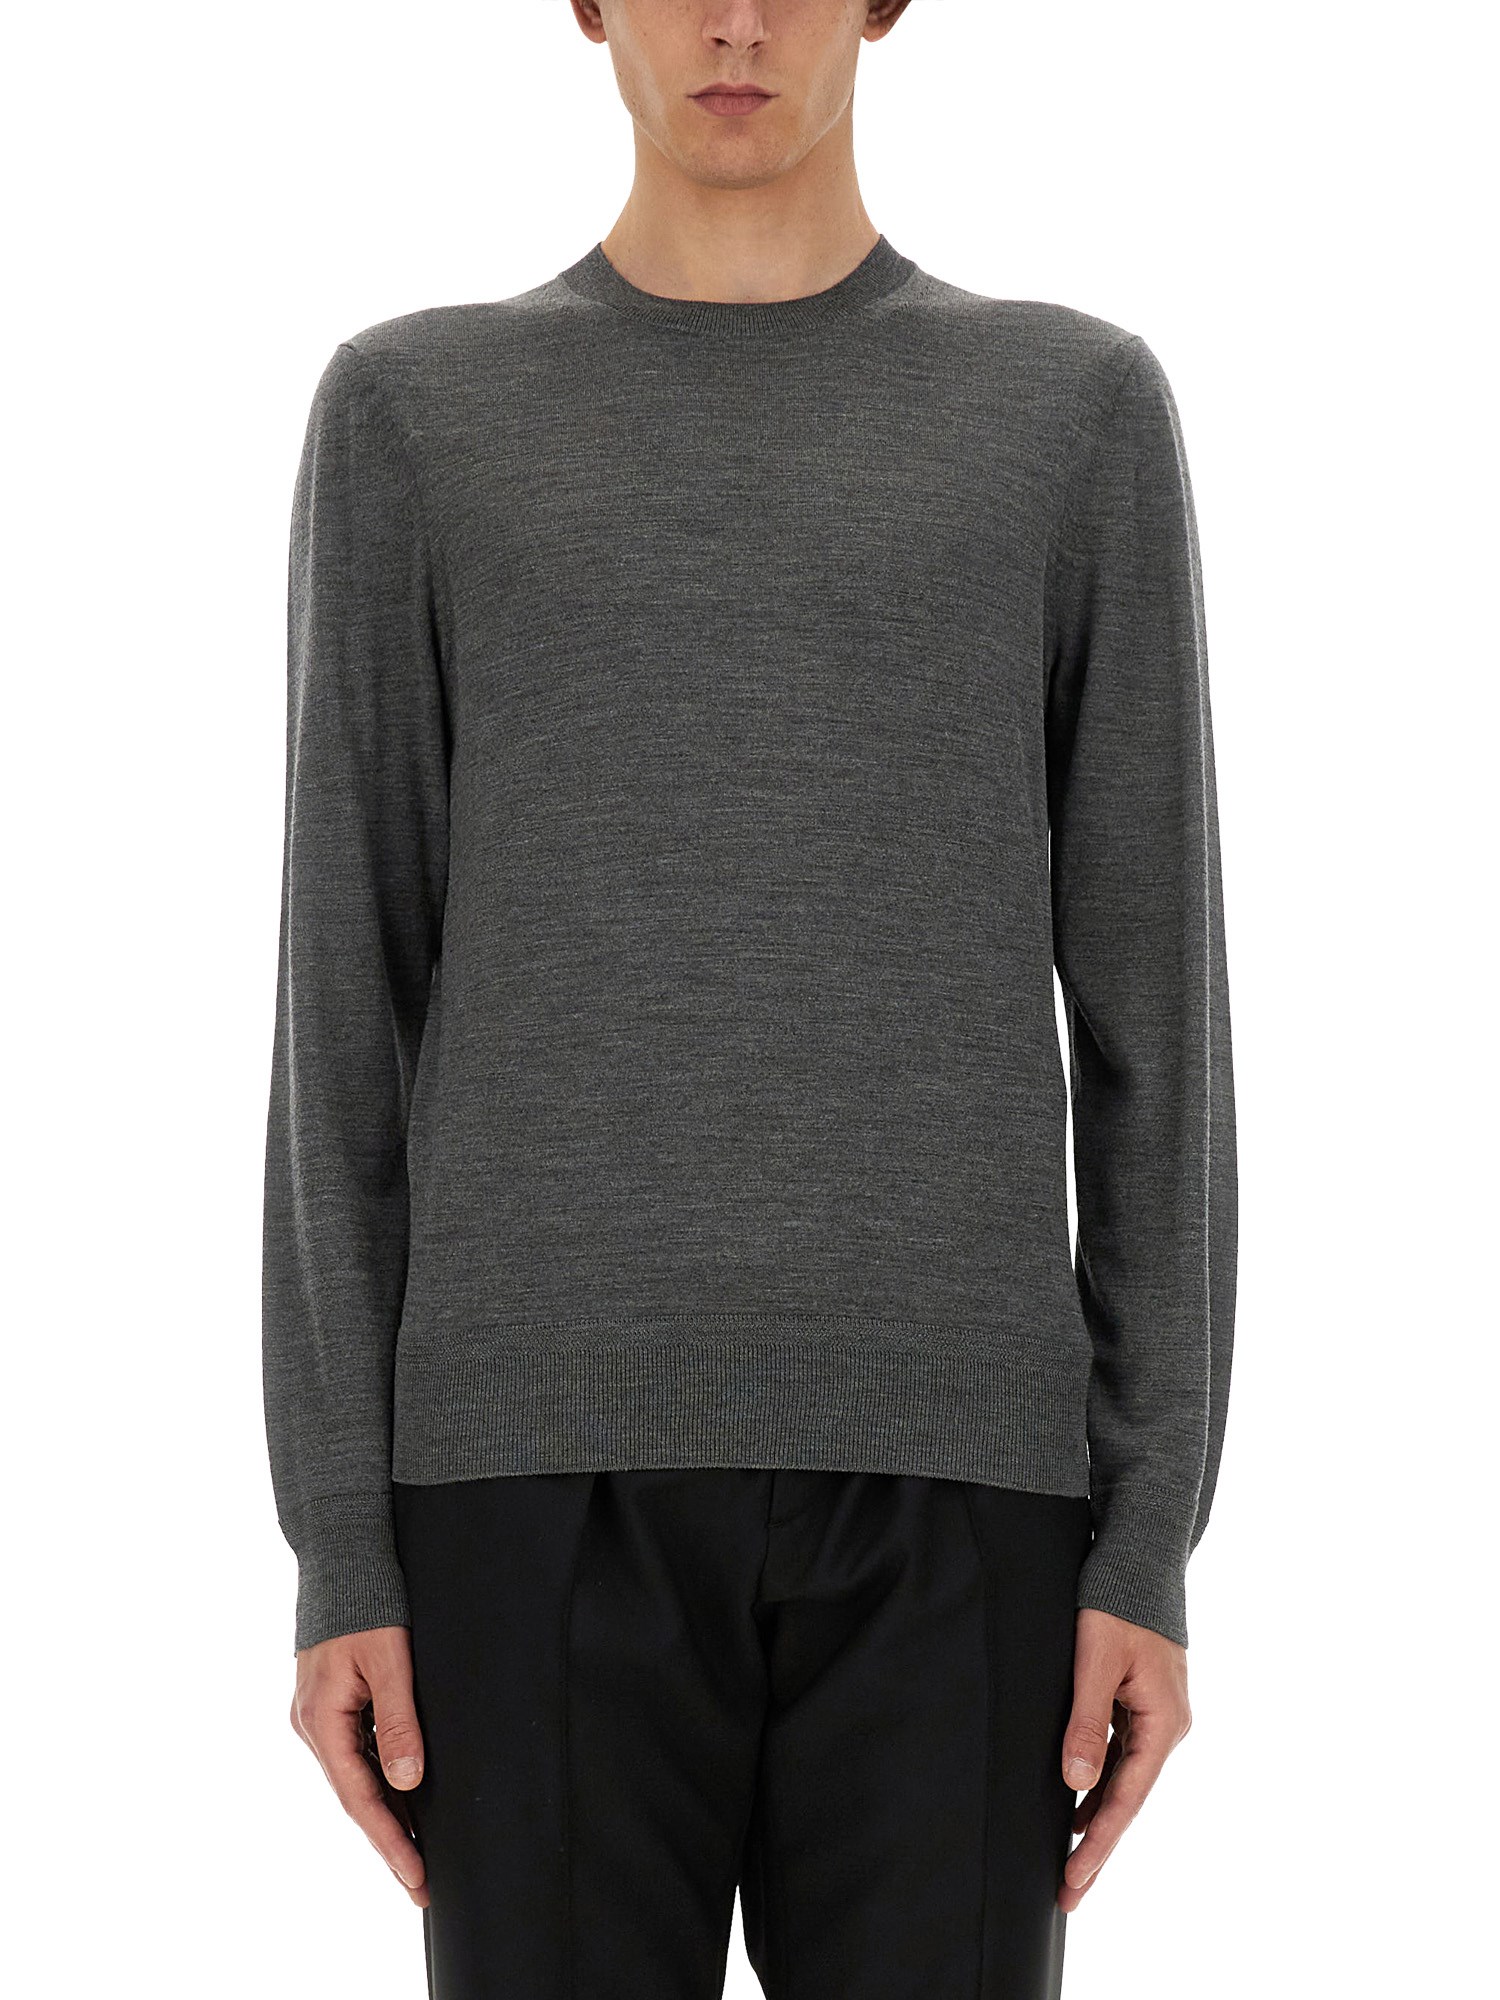 Tom Ford Wool Jersey. In Gray